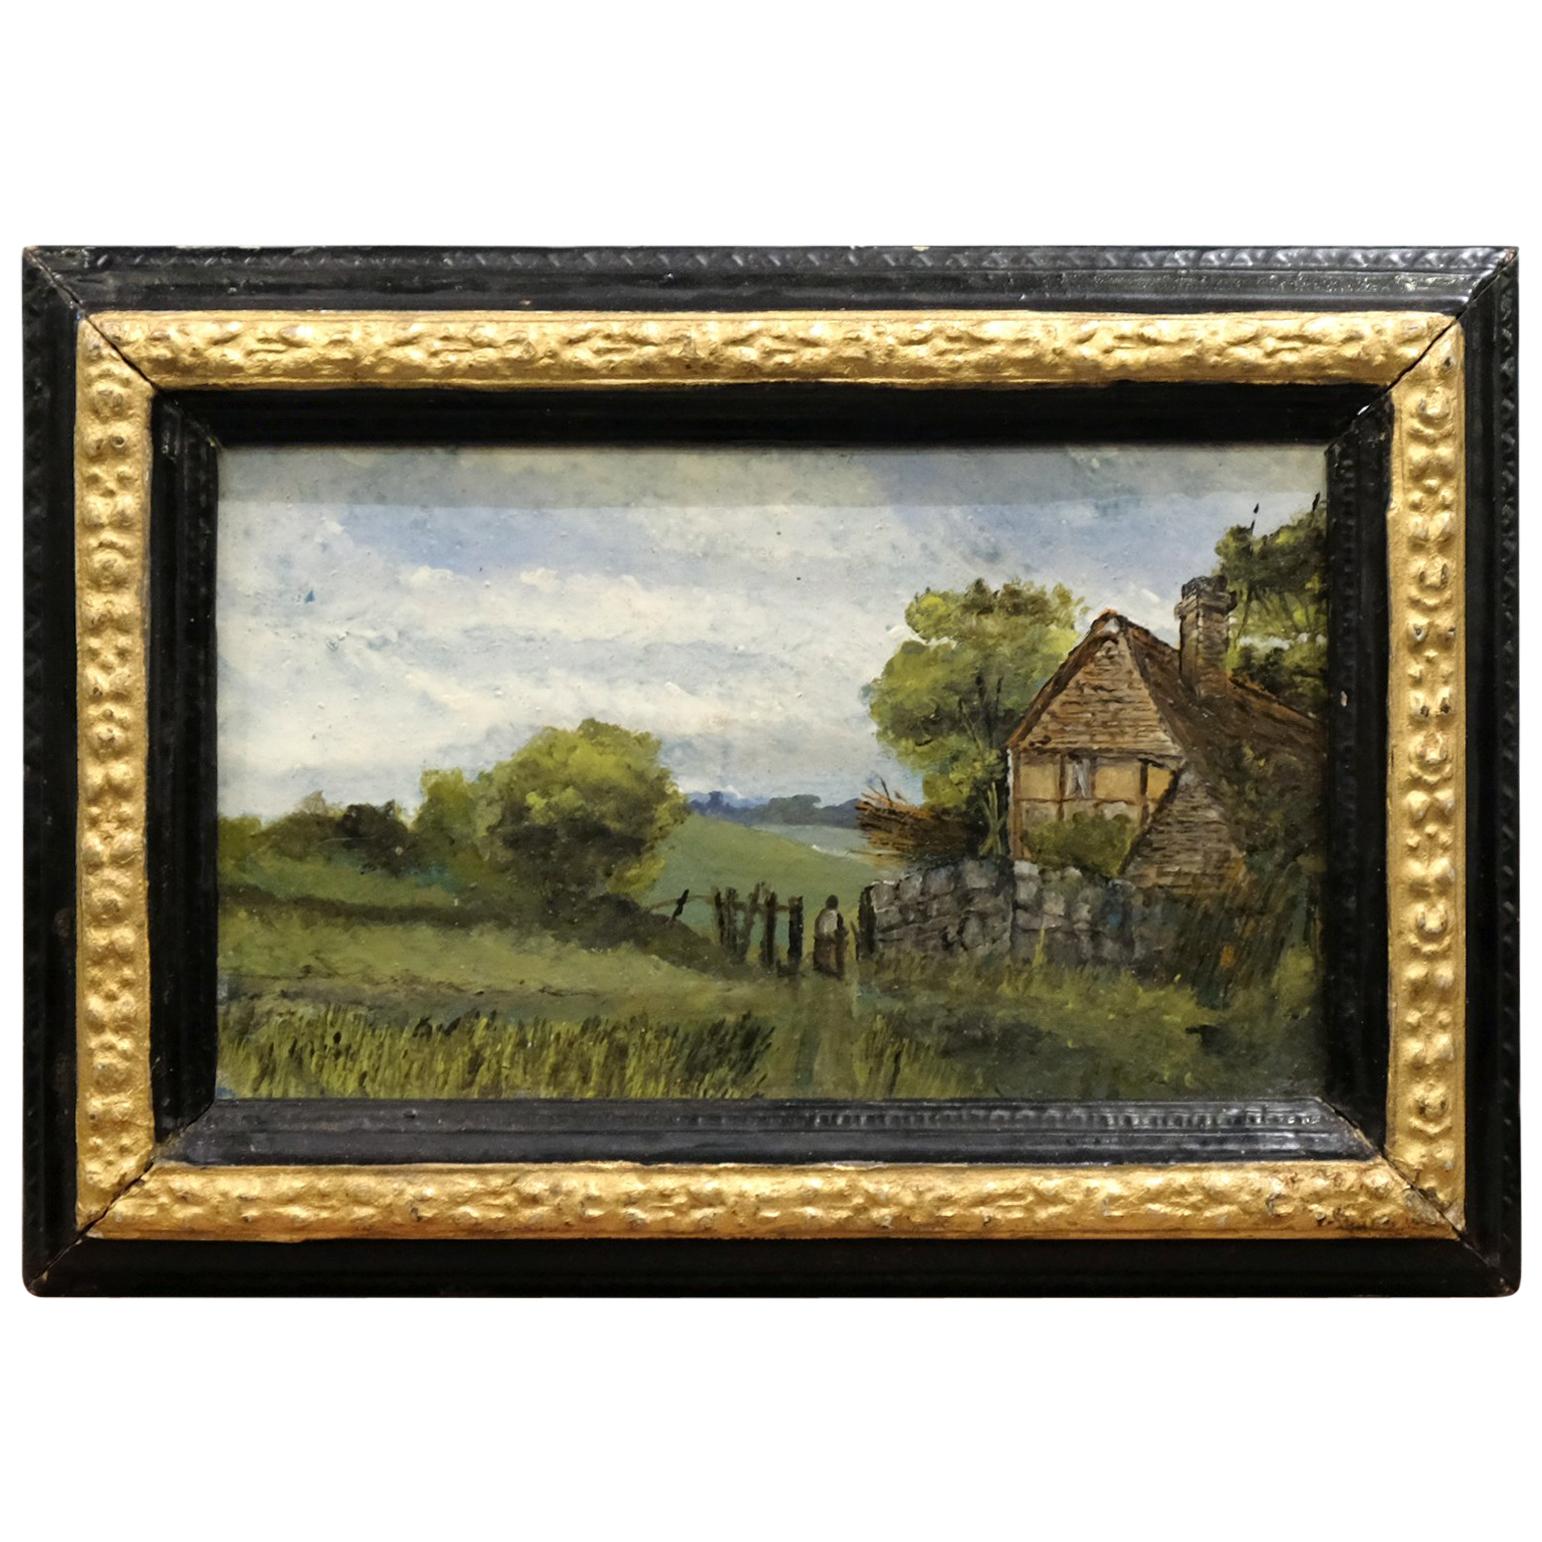 Country Scene 19th Century Small Oil Painting on Board in Period Ebonized Frame